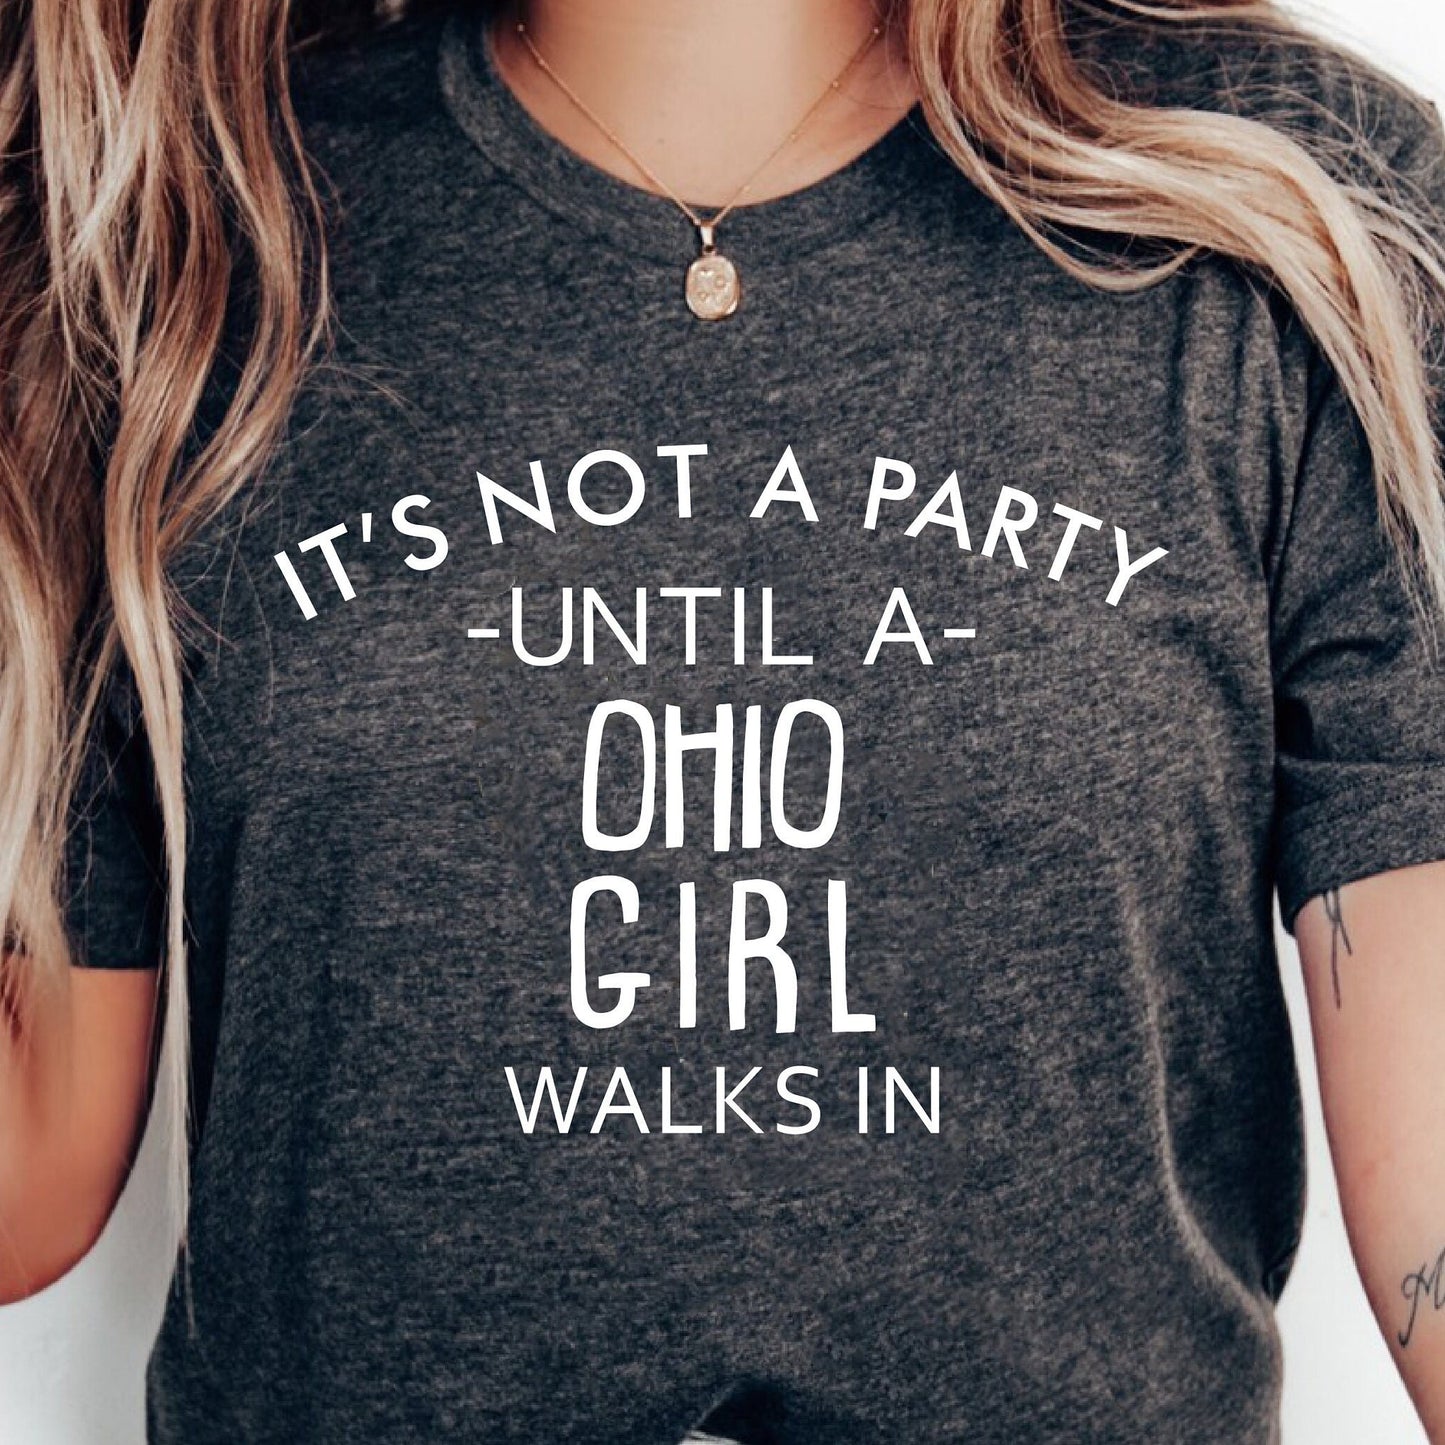 It's Not A Party Until A Ohio Girl Walks In T-shirt